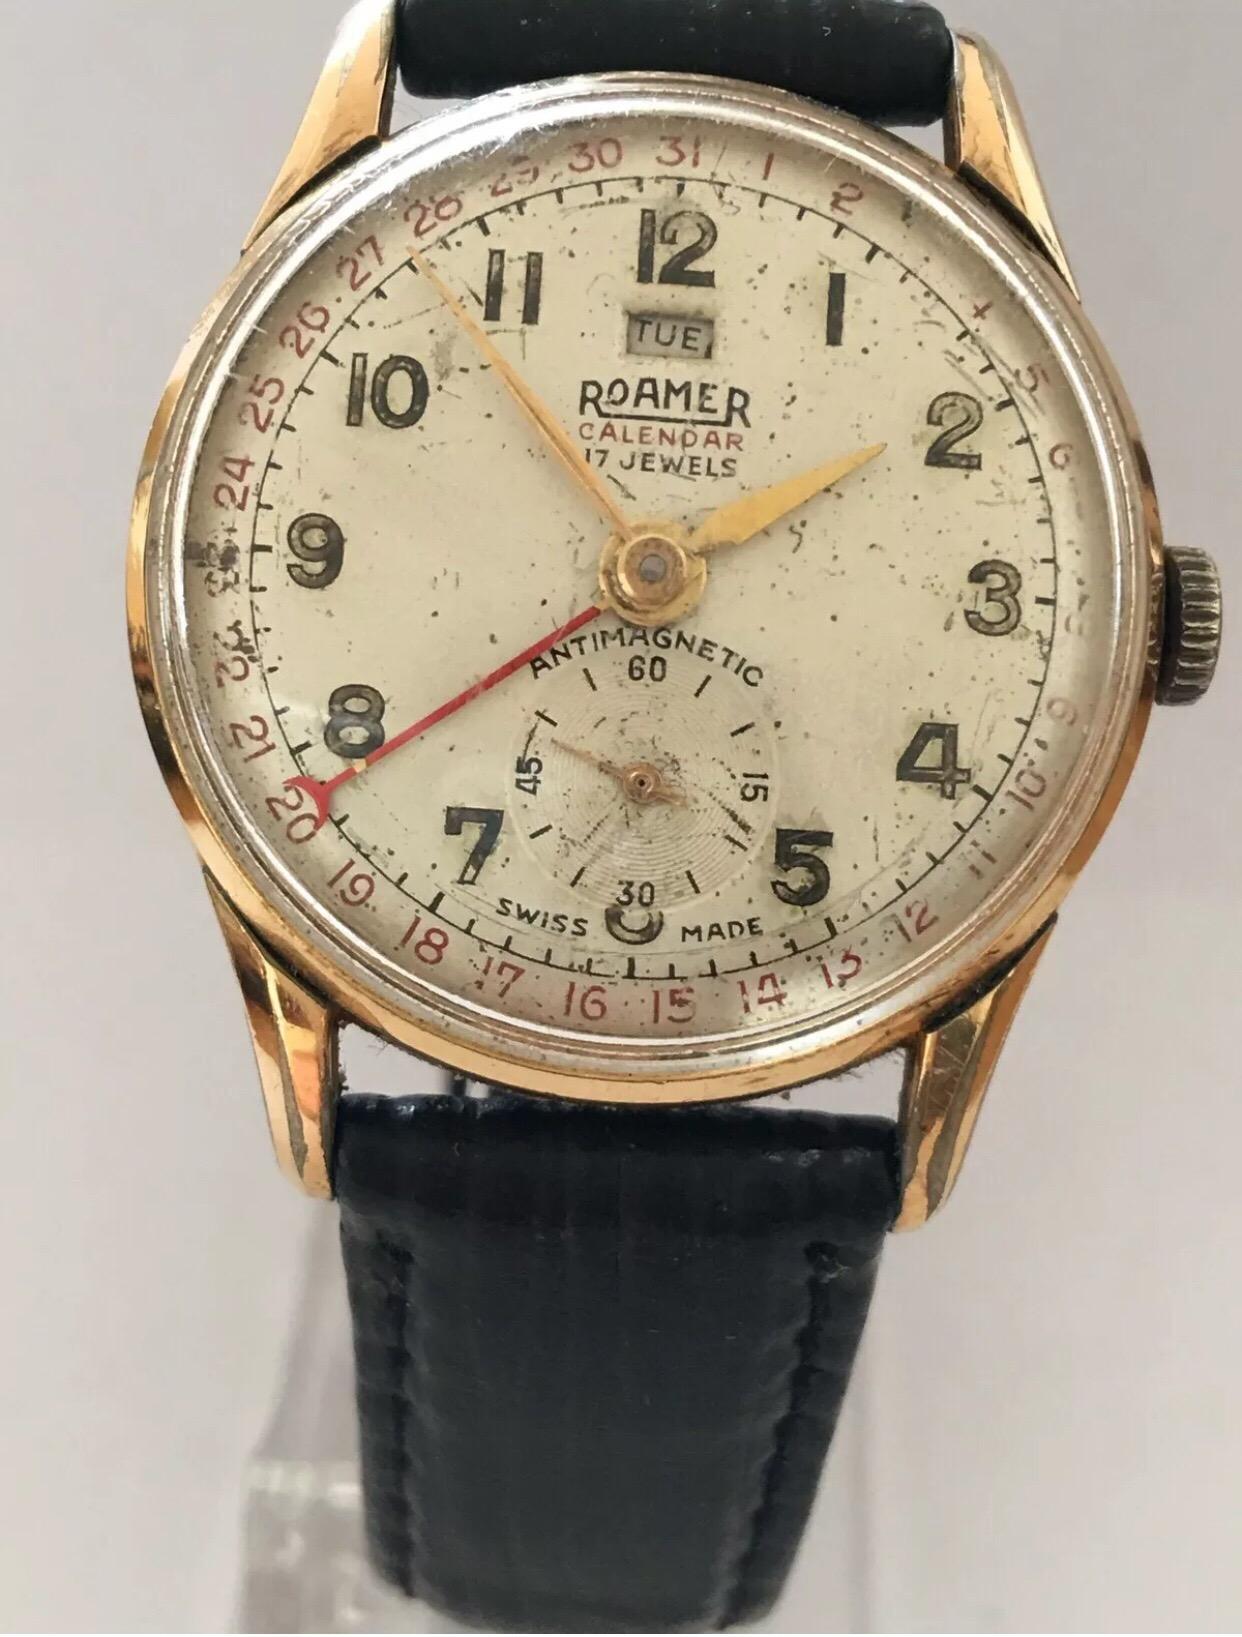 1950’s Roamer Calendar Hand-Winding Wristwatch.

This watch is working and running well. The Dial has aged. The Gold plated watch case is a bit tarnished as well as the winder. The black strap is torn near the buckle as shown on the photo. Please